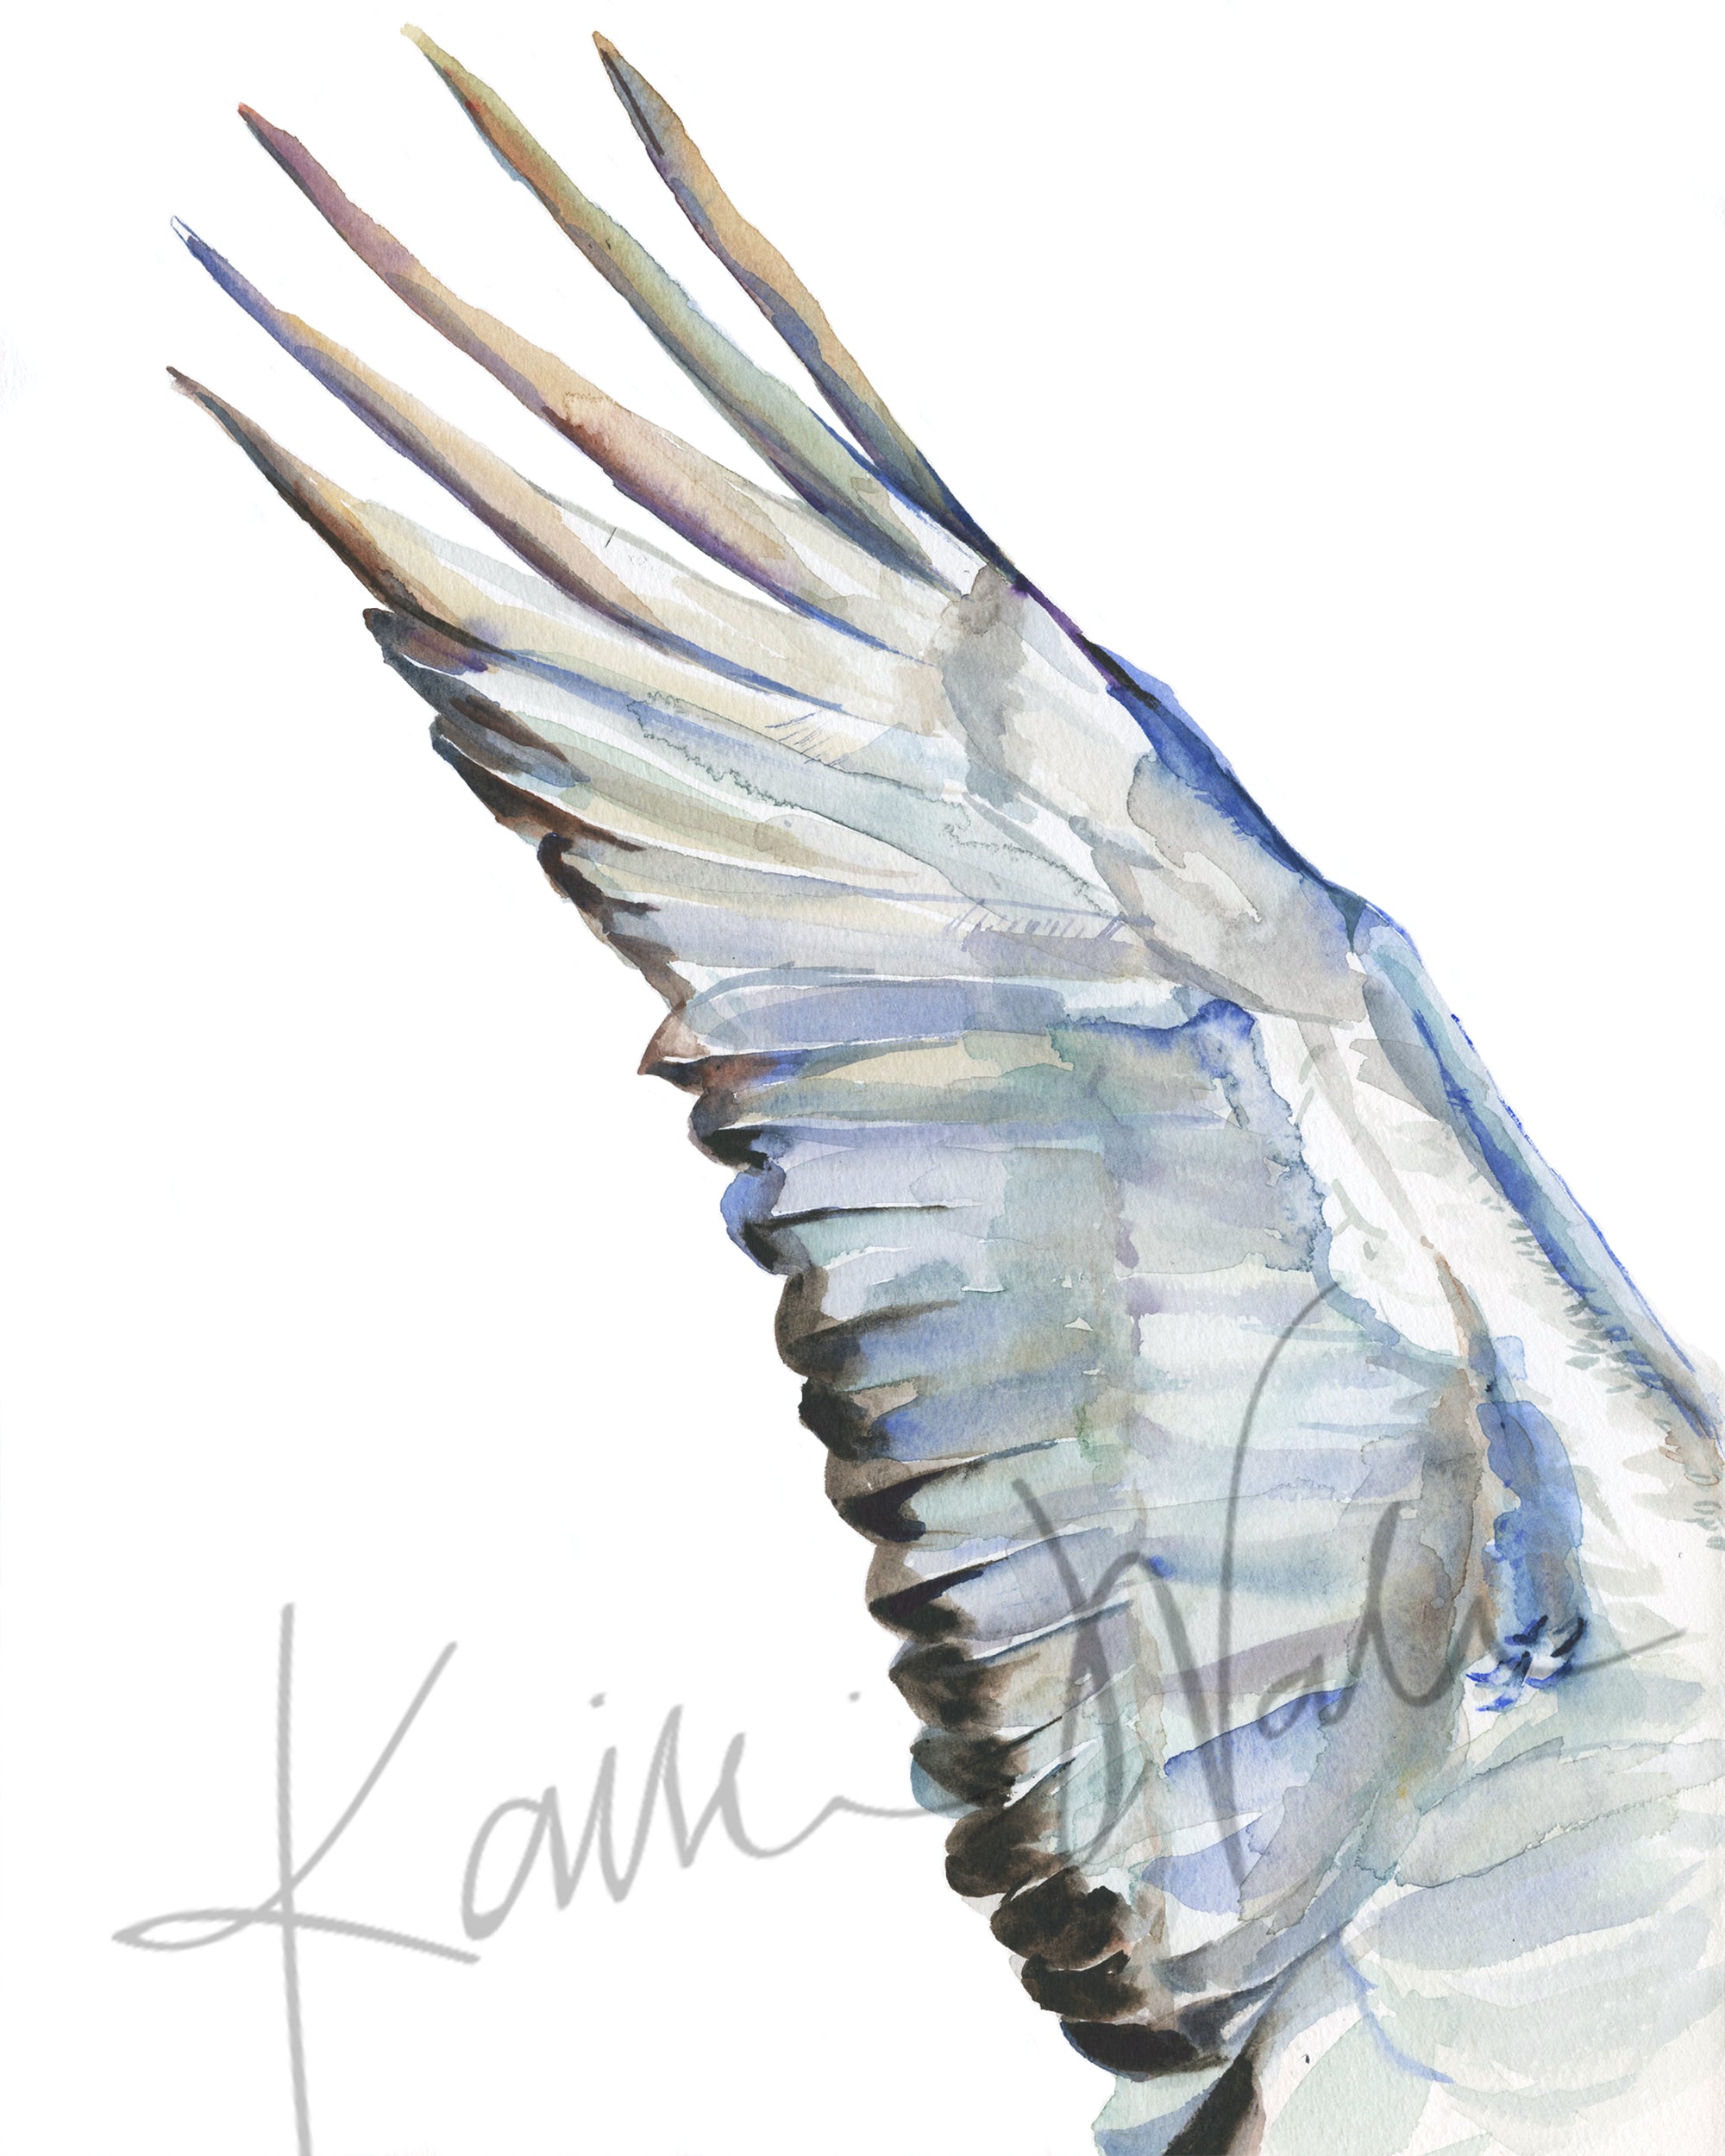 Unframed watercolor diptych of a crane's wings with white feathers.